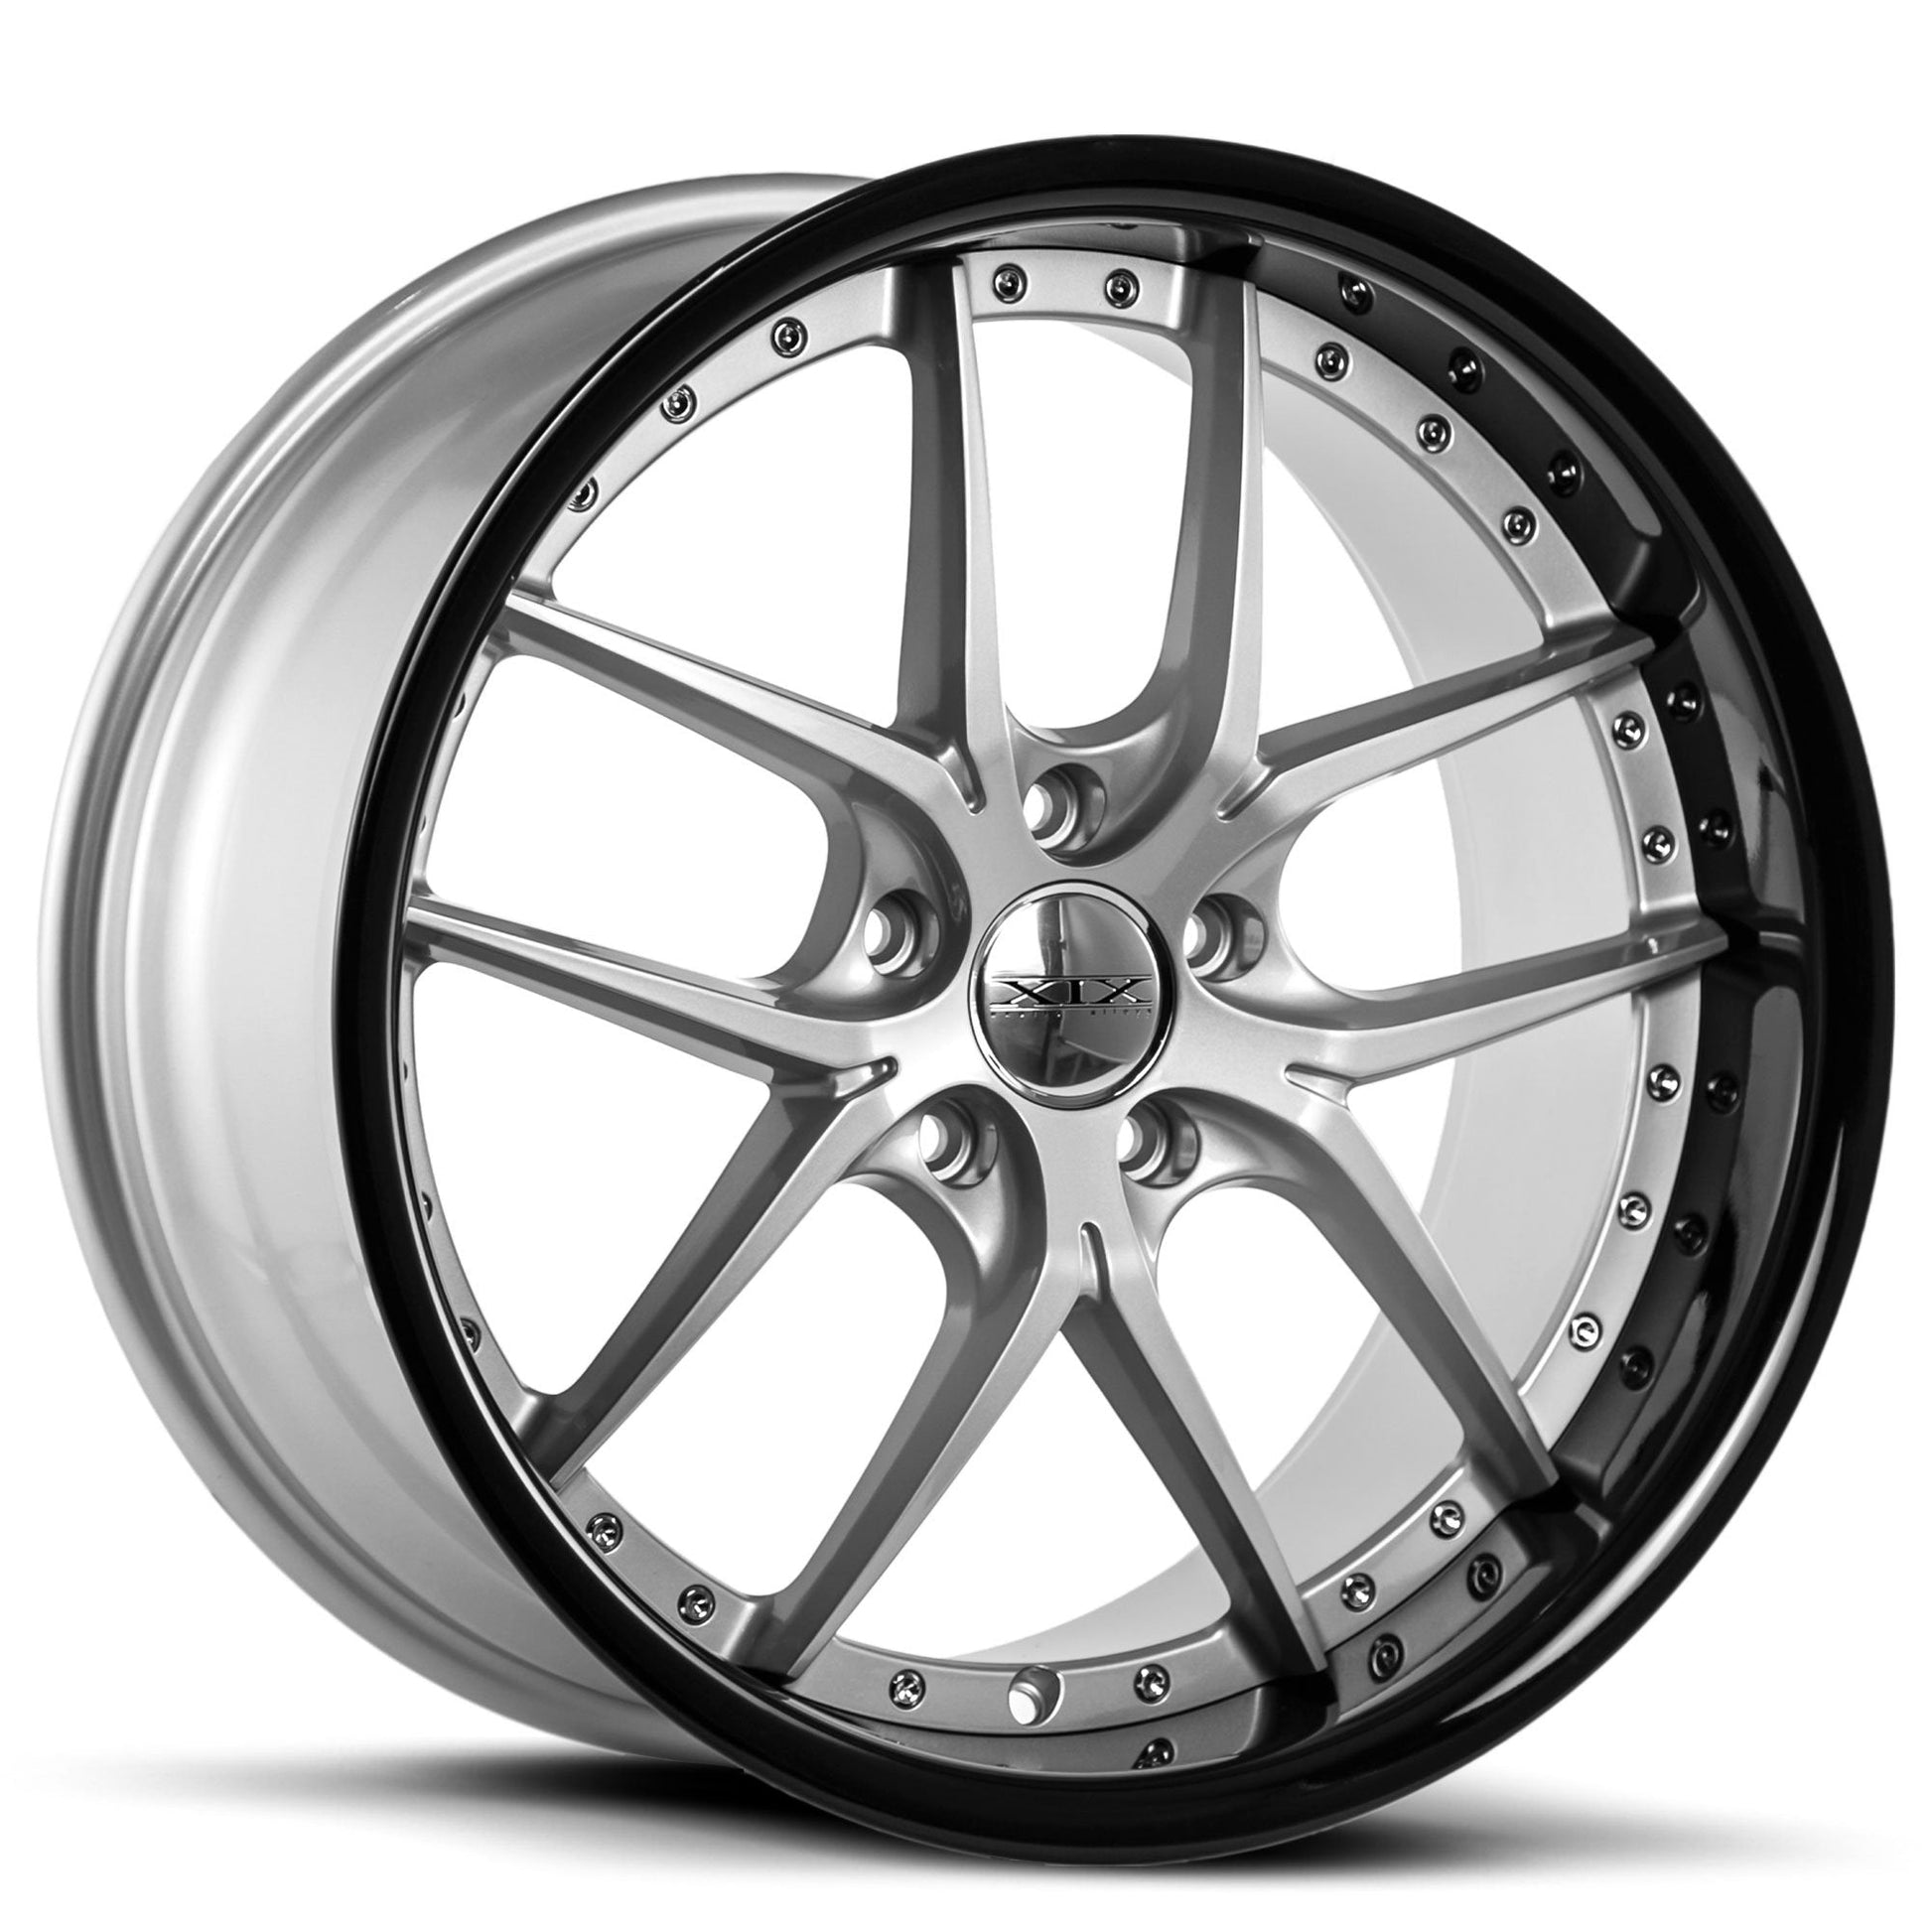 XIX-X61-Silver-Machined-with-Stainless-Steel-Lip-Silver-20x8.5-66.56-wheels-rims-felger-Felghuset